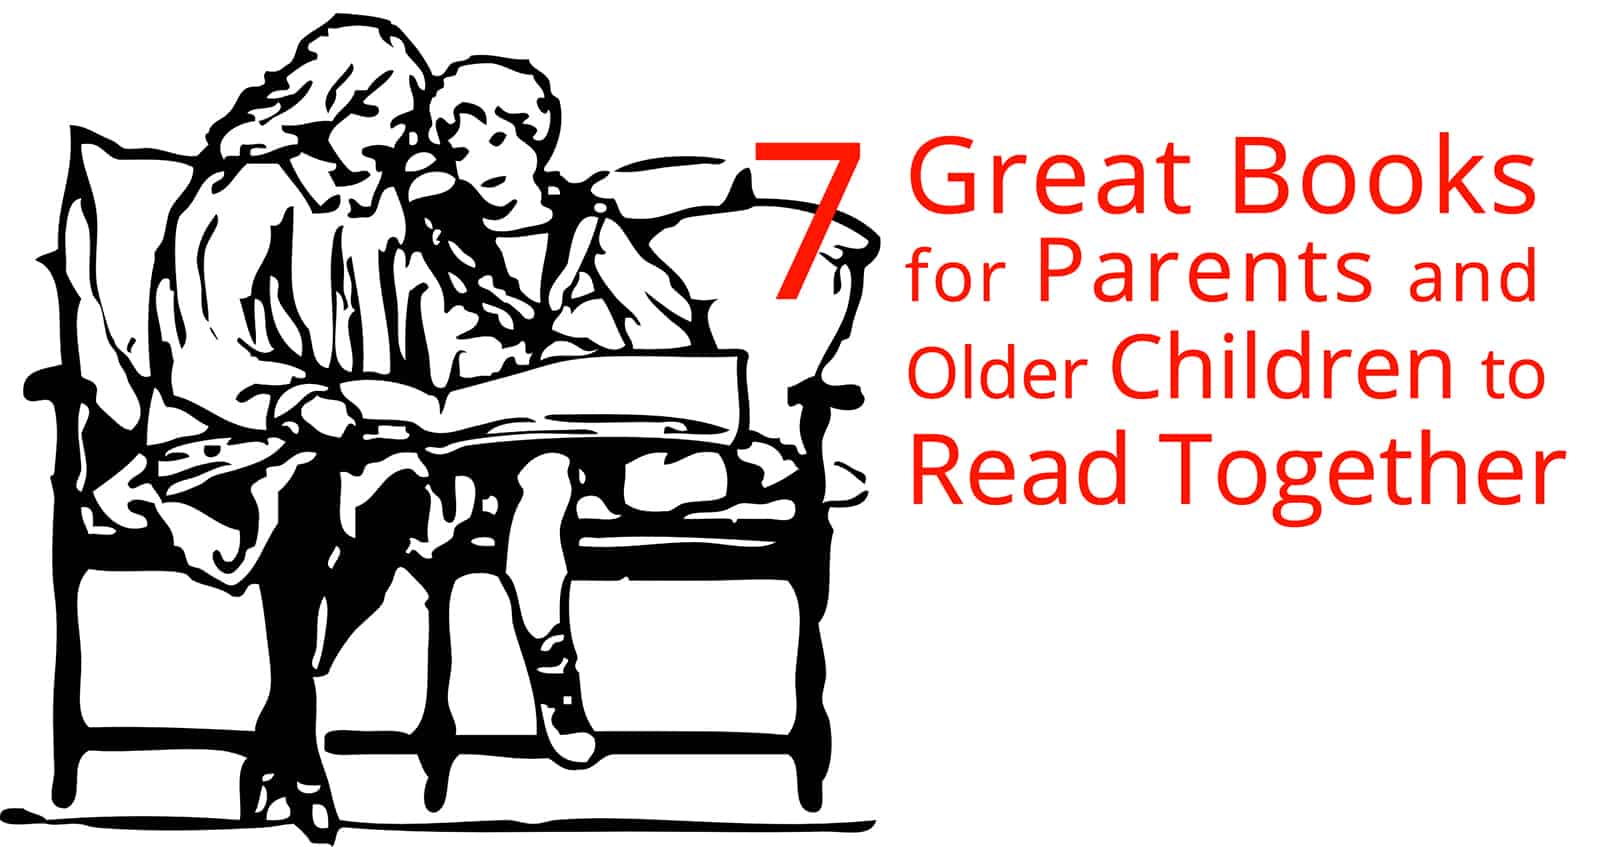 7 Great Books for Parents and Older Children to Read Together